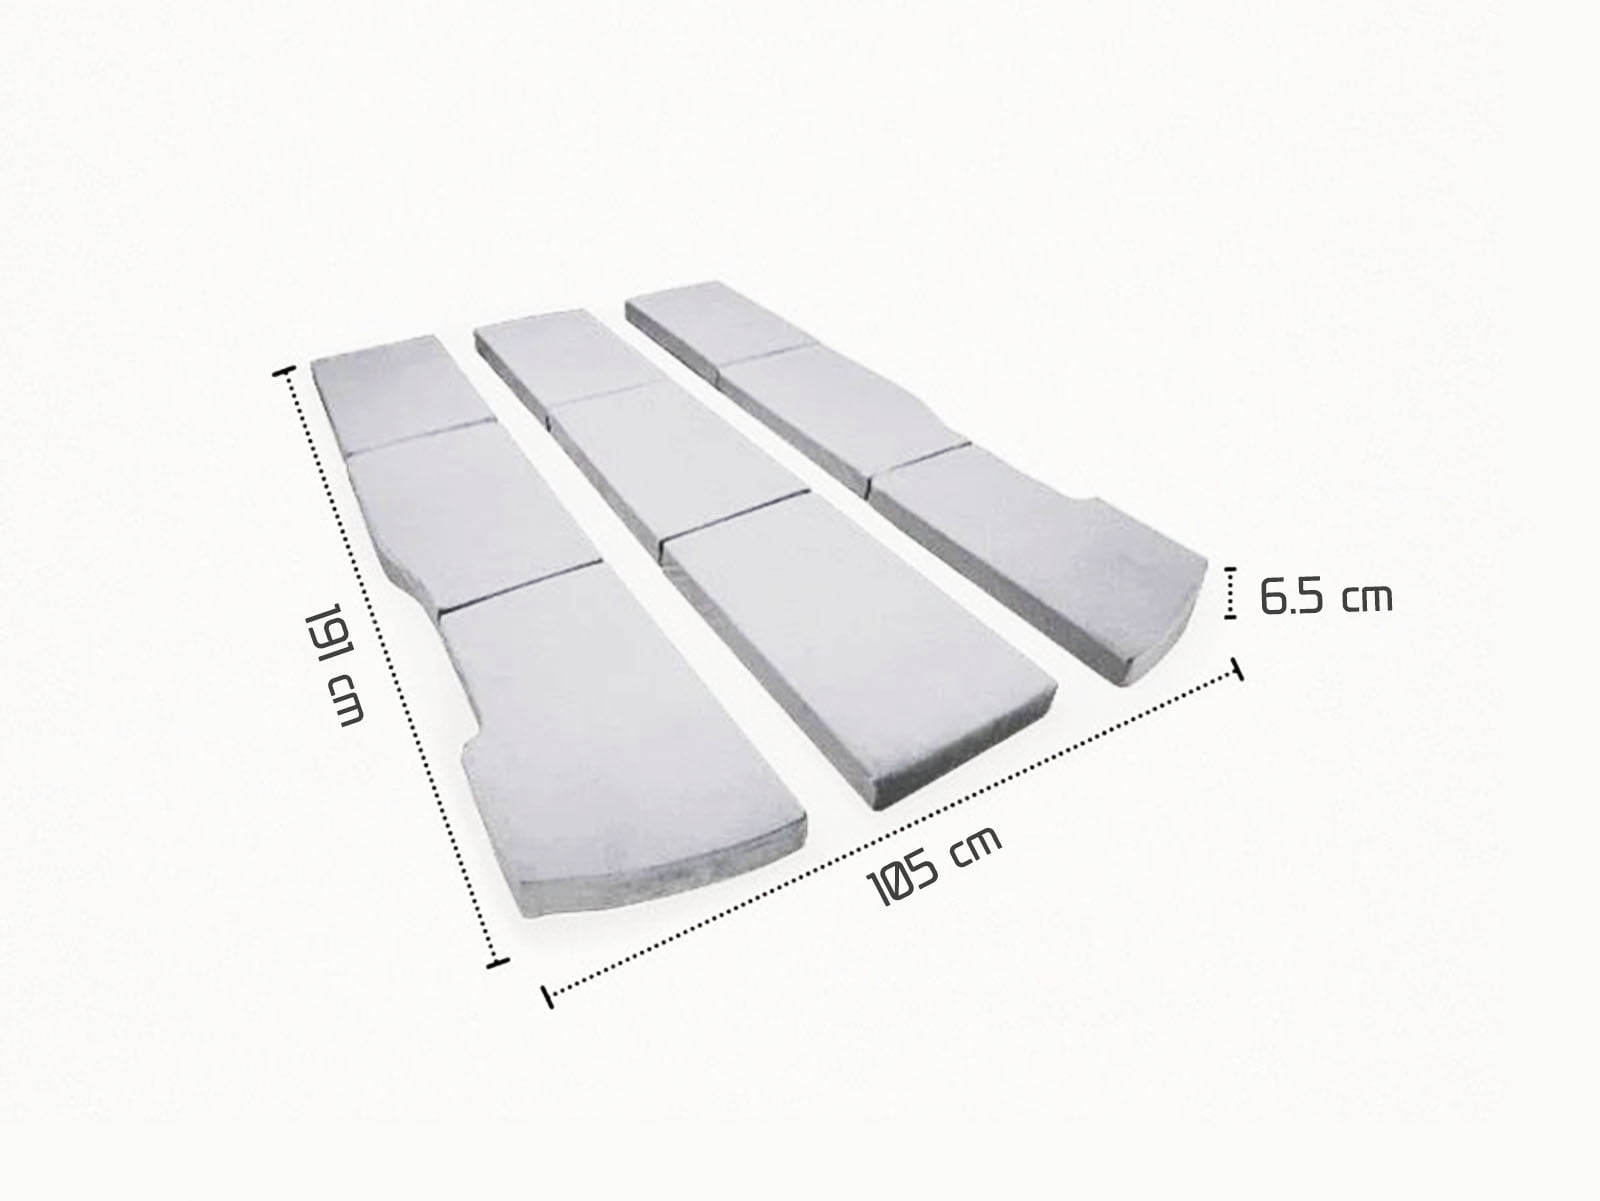 https://www.plugear.com/wp-content/uploads/2022/12/my320_Tesla-Model-3-and-Model-Y_Twin-Size-Camping-Mattress-Set-Memory-Foam-Storage-Bag-_-Sheet-Included-Portable-Foldable-Space-saving-in-Car-Sleeping_01.jpg